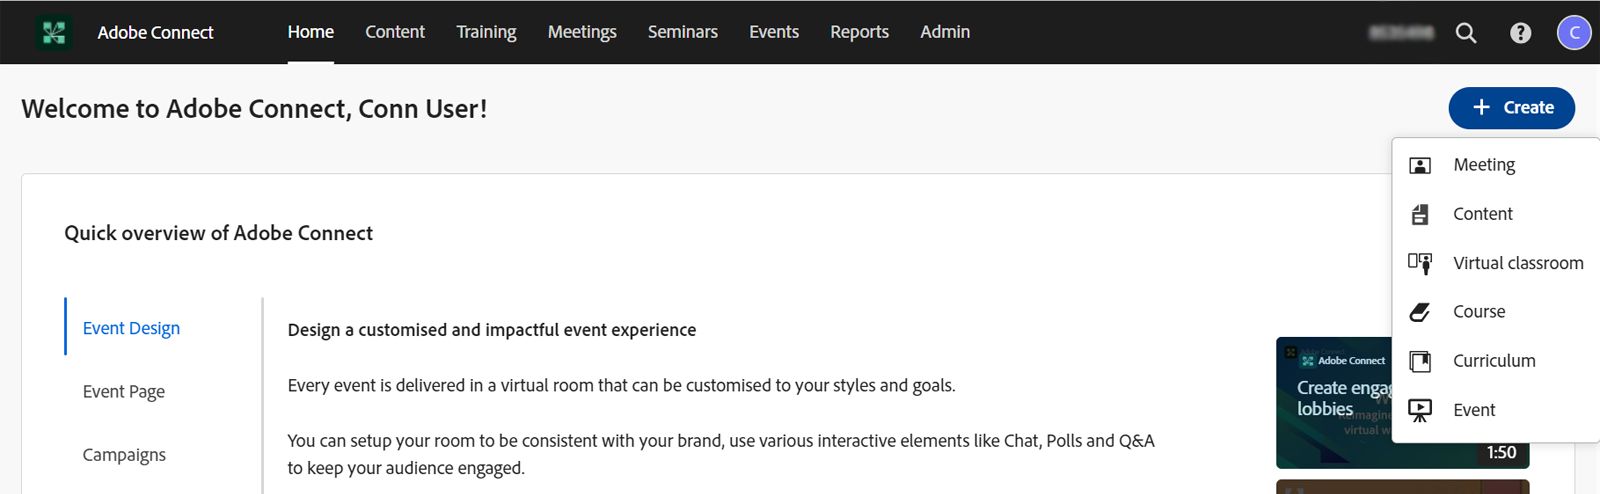 Create a new meeting from the Adobe Connect Central home page